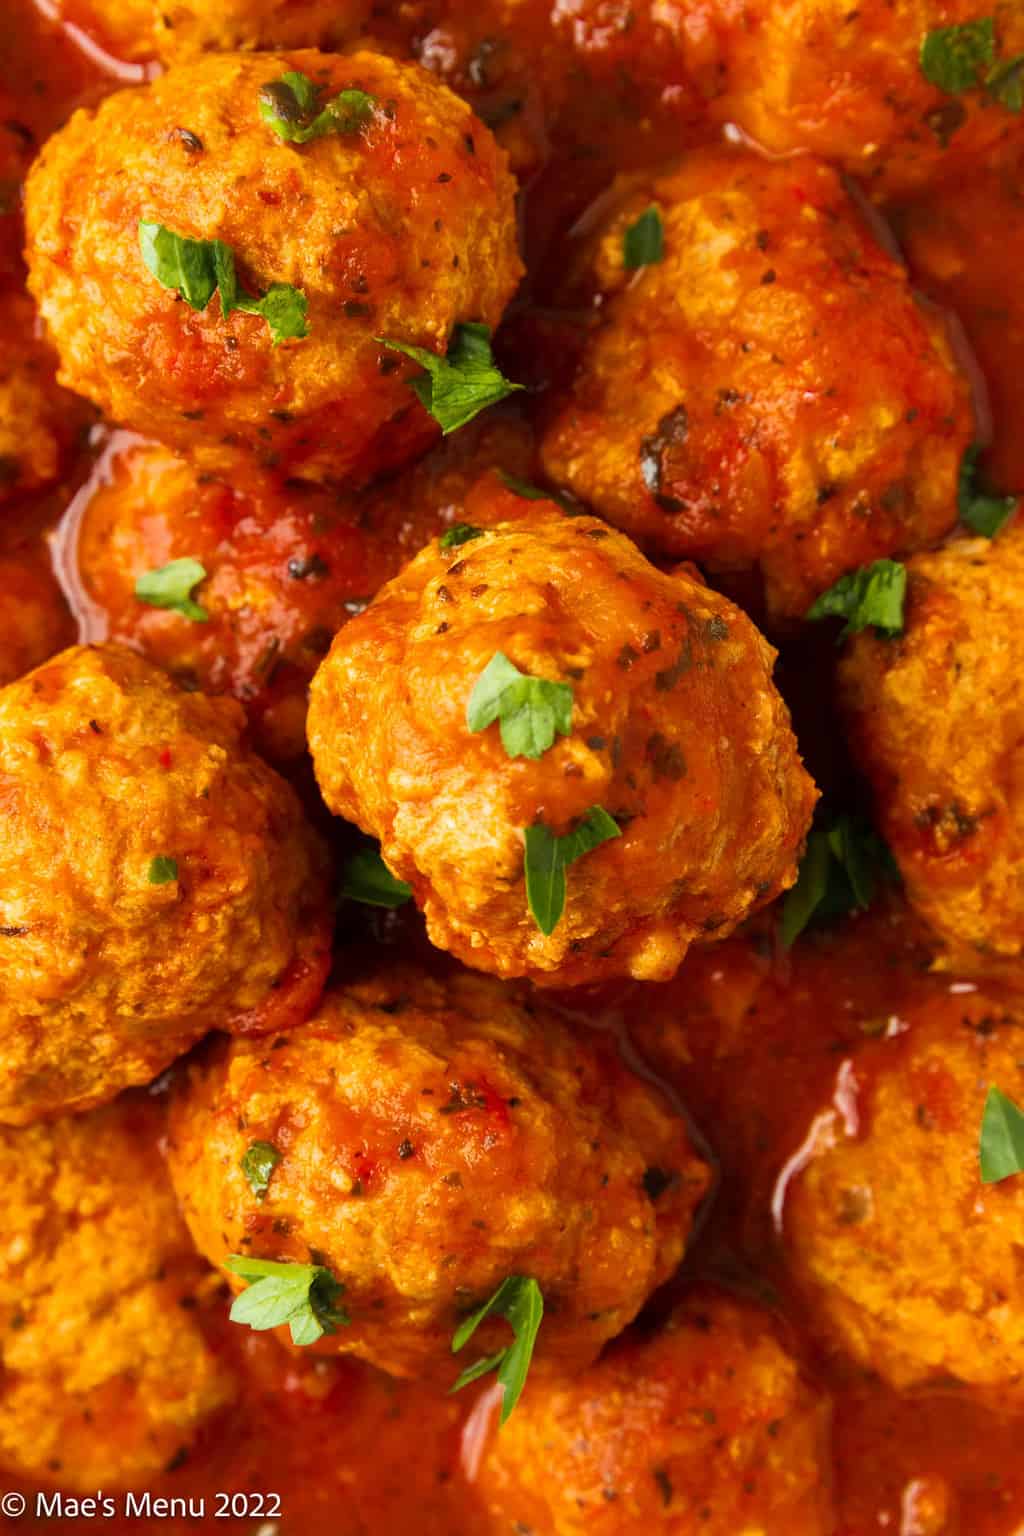 An up-close overhead shot of meatballs in sauce.